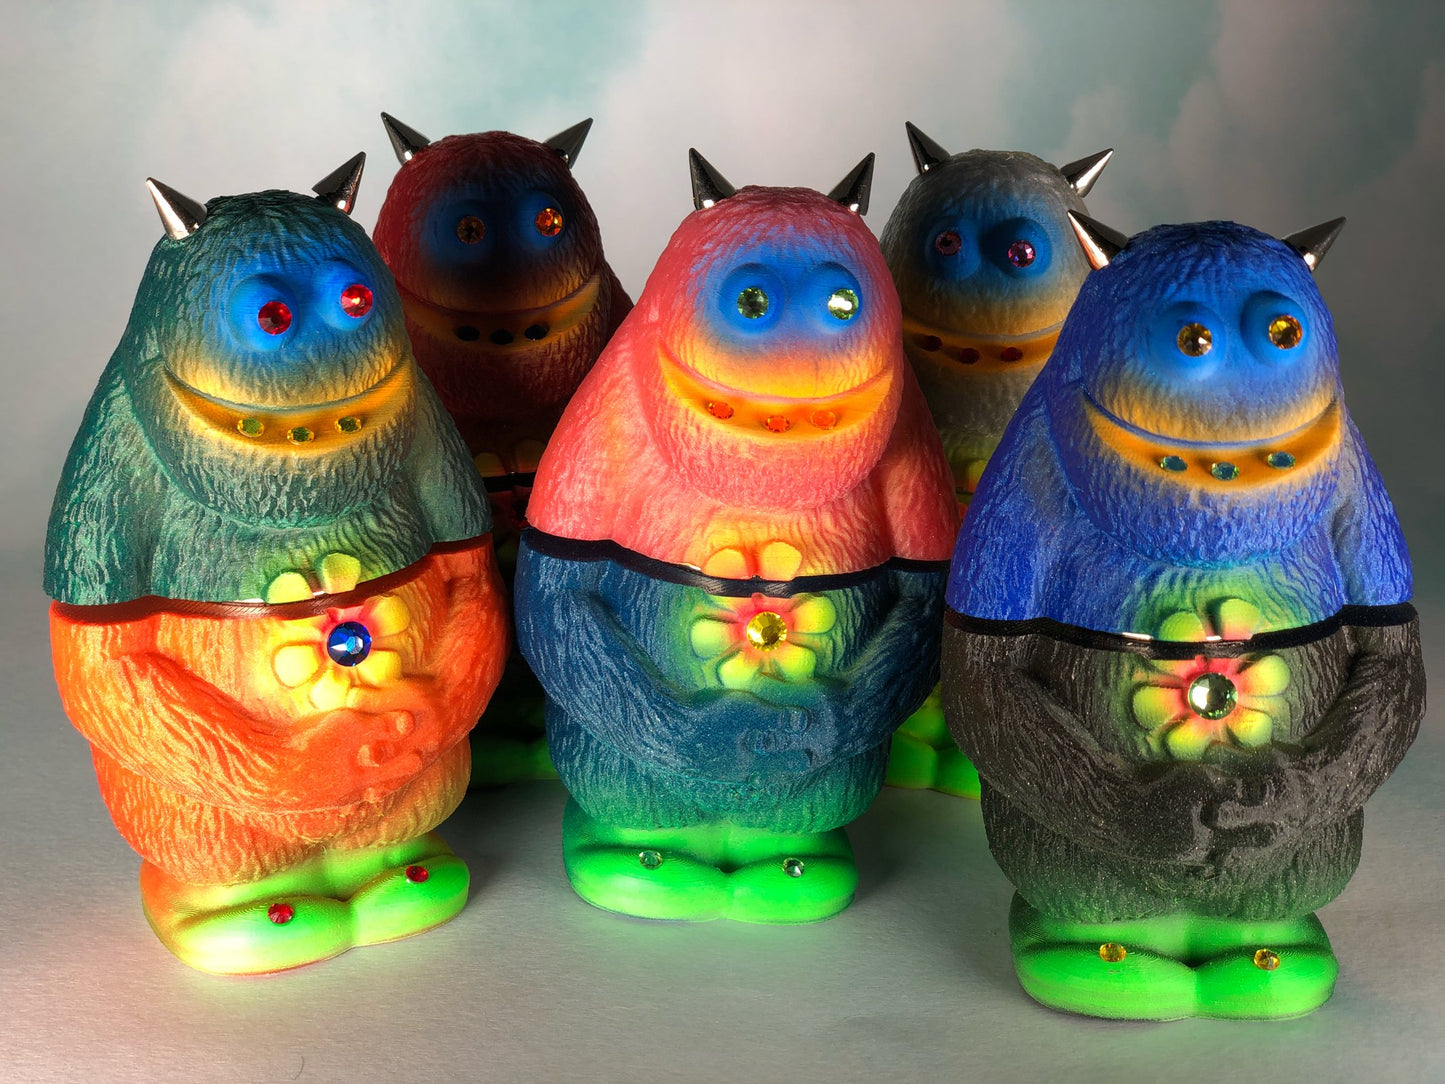 Mix ‘n Match Monsters (set of 5)